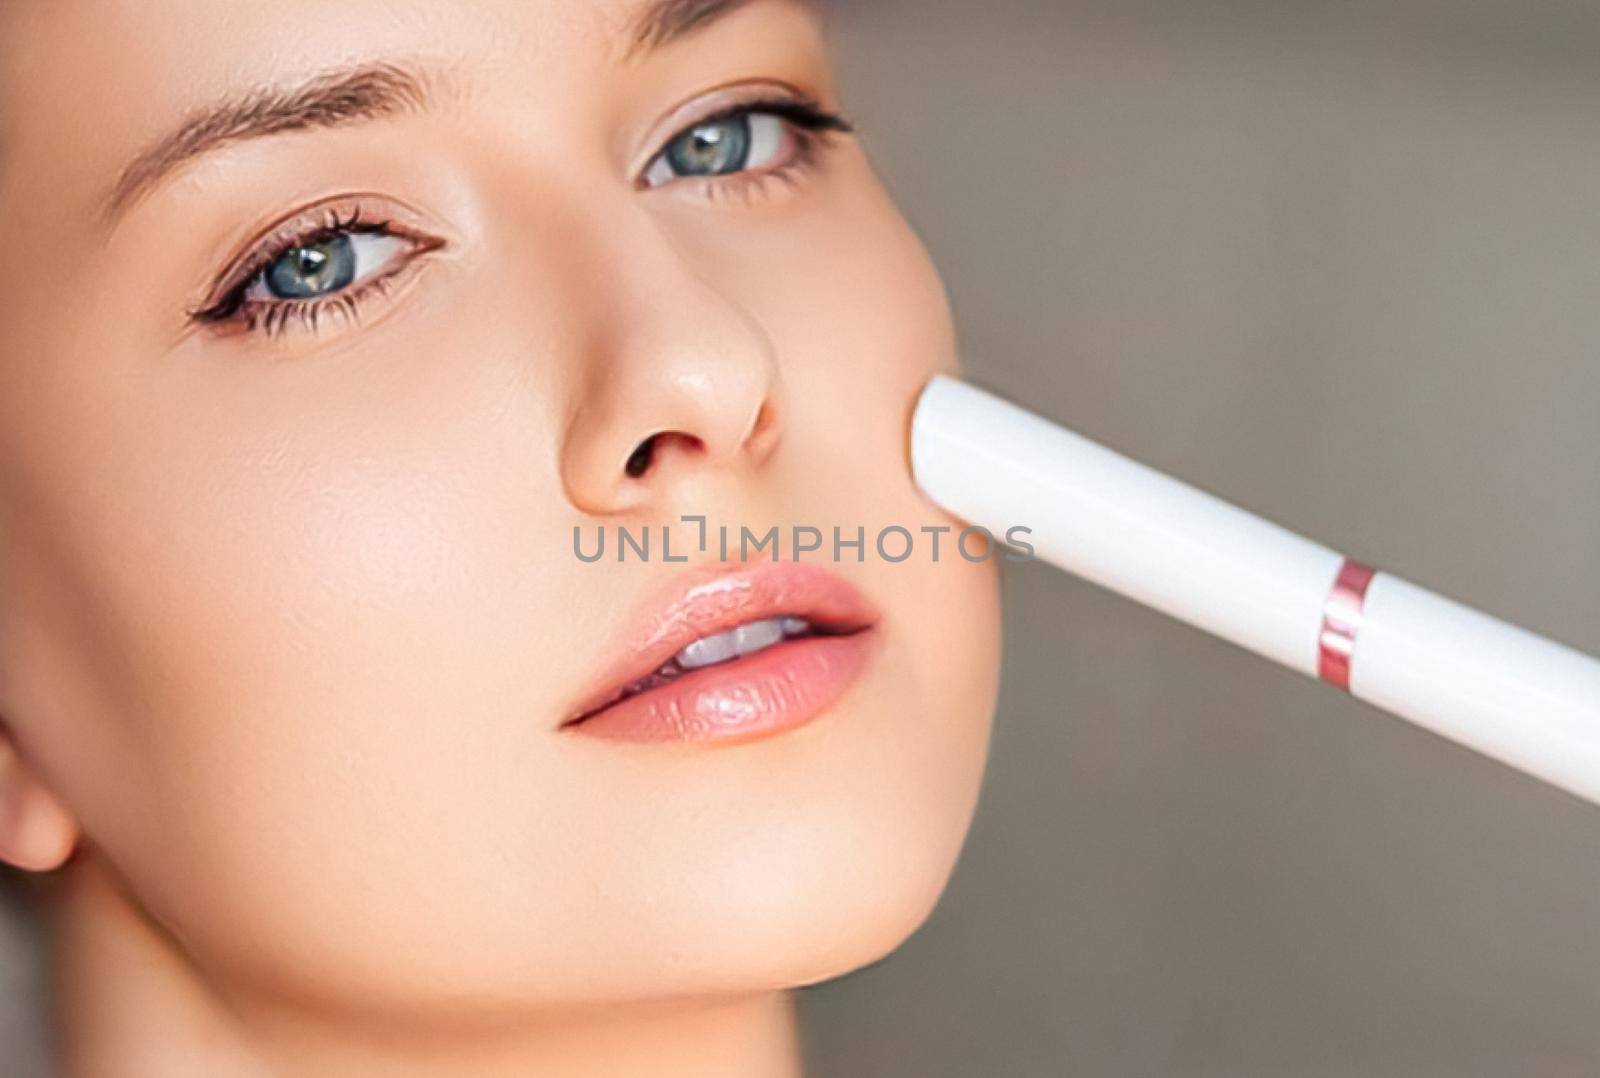 Anti aging cosmetology and beauty treatment product, woman using laser device for skin resurfacing as rejuvenation procedure and skincare routine, close-up